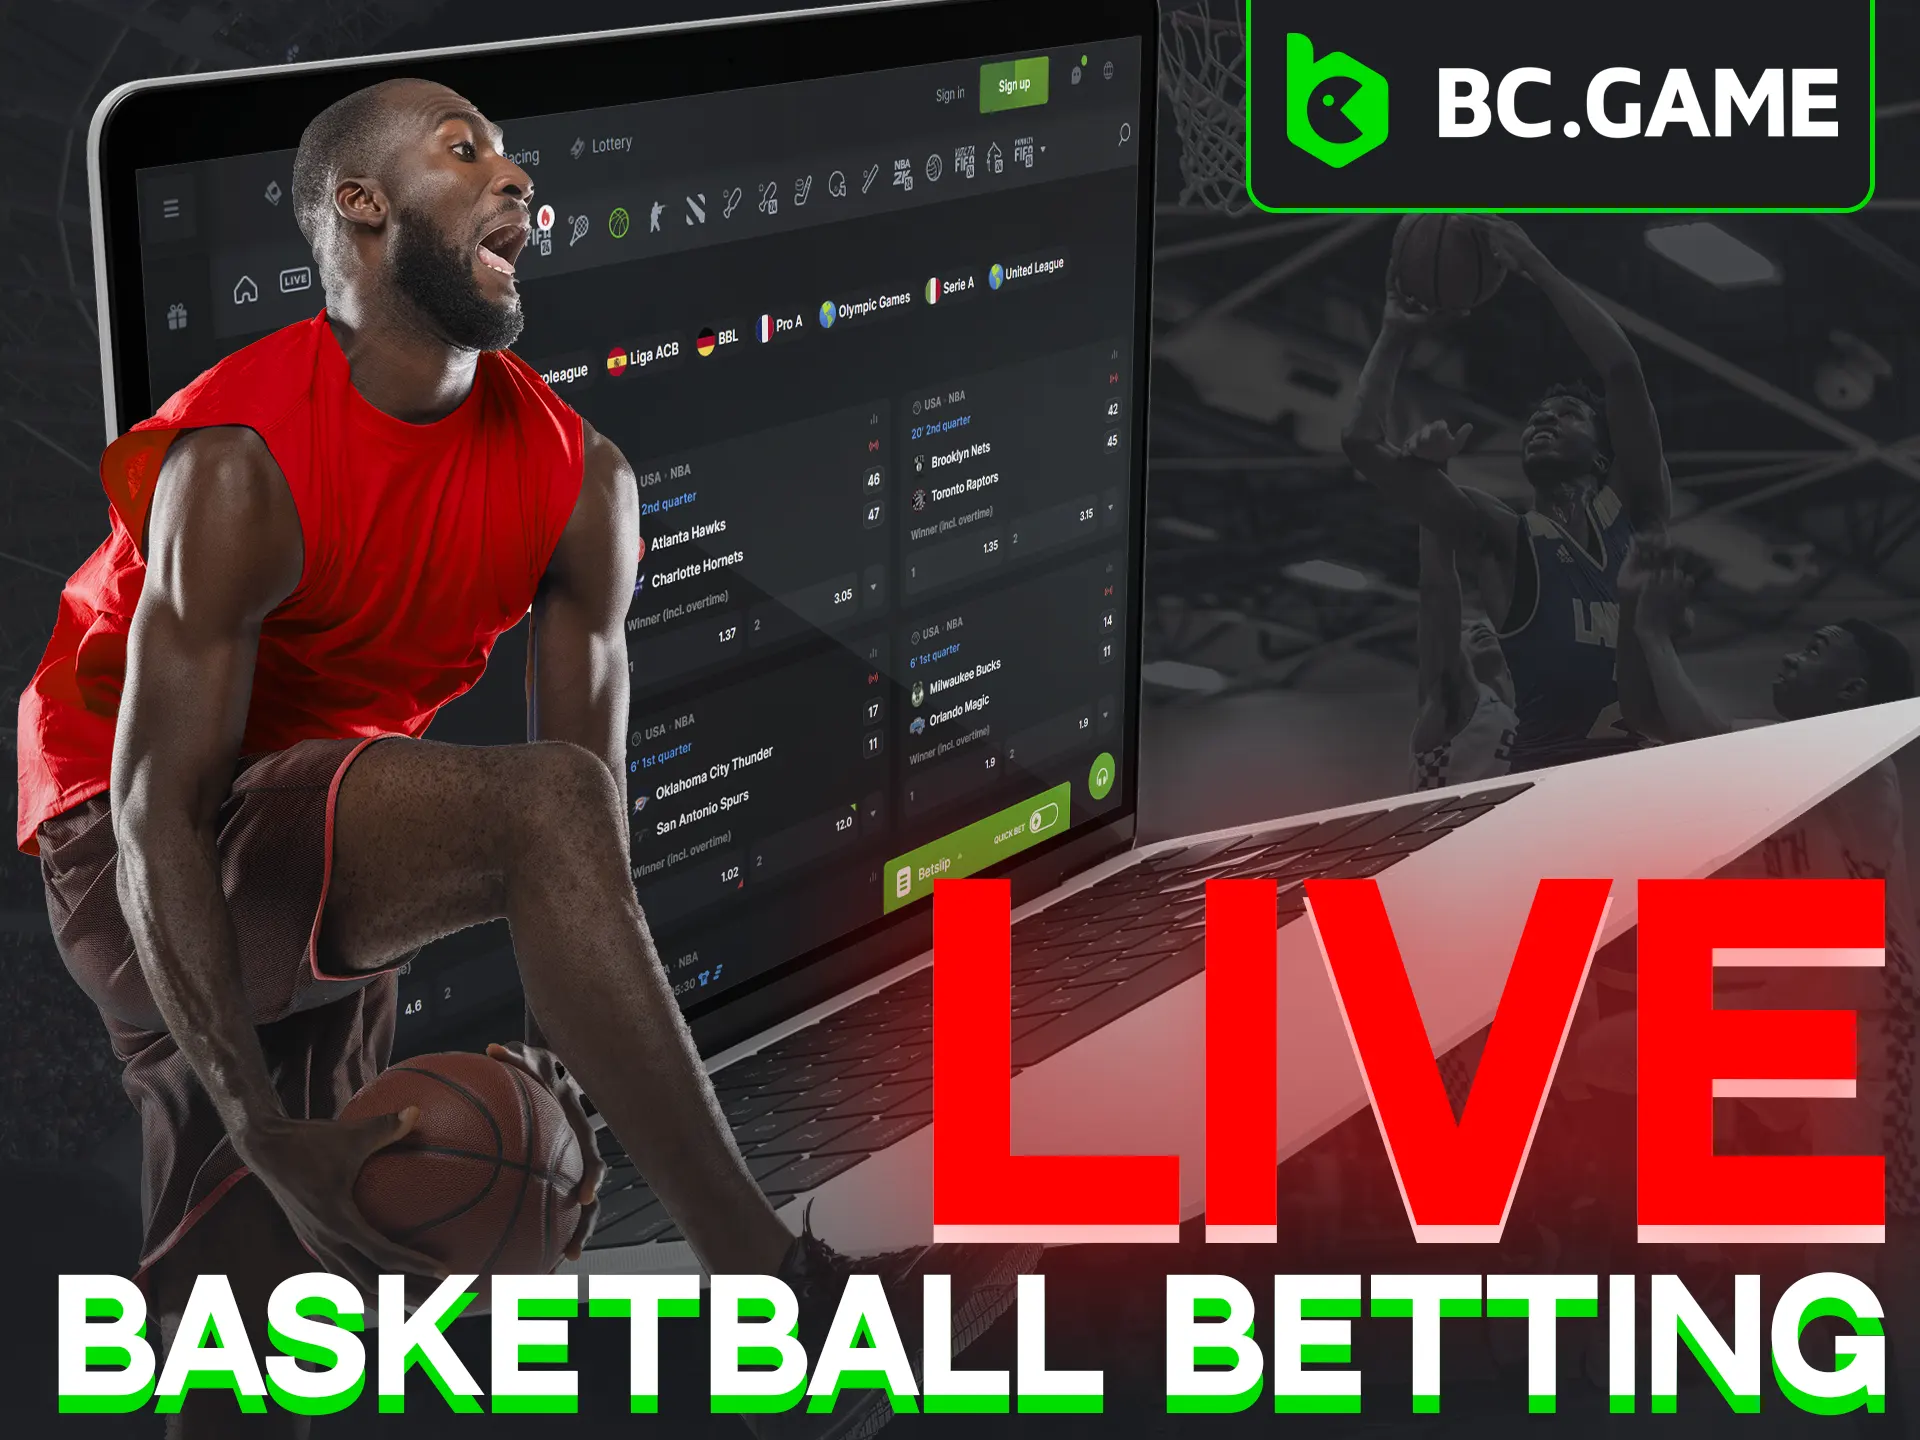 Bet live on basketball matches at BC Game.